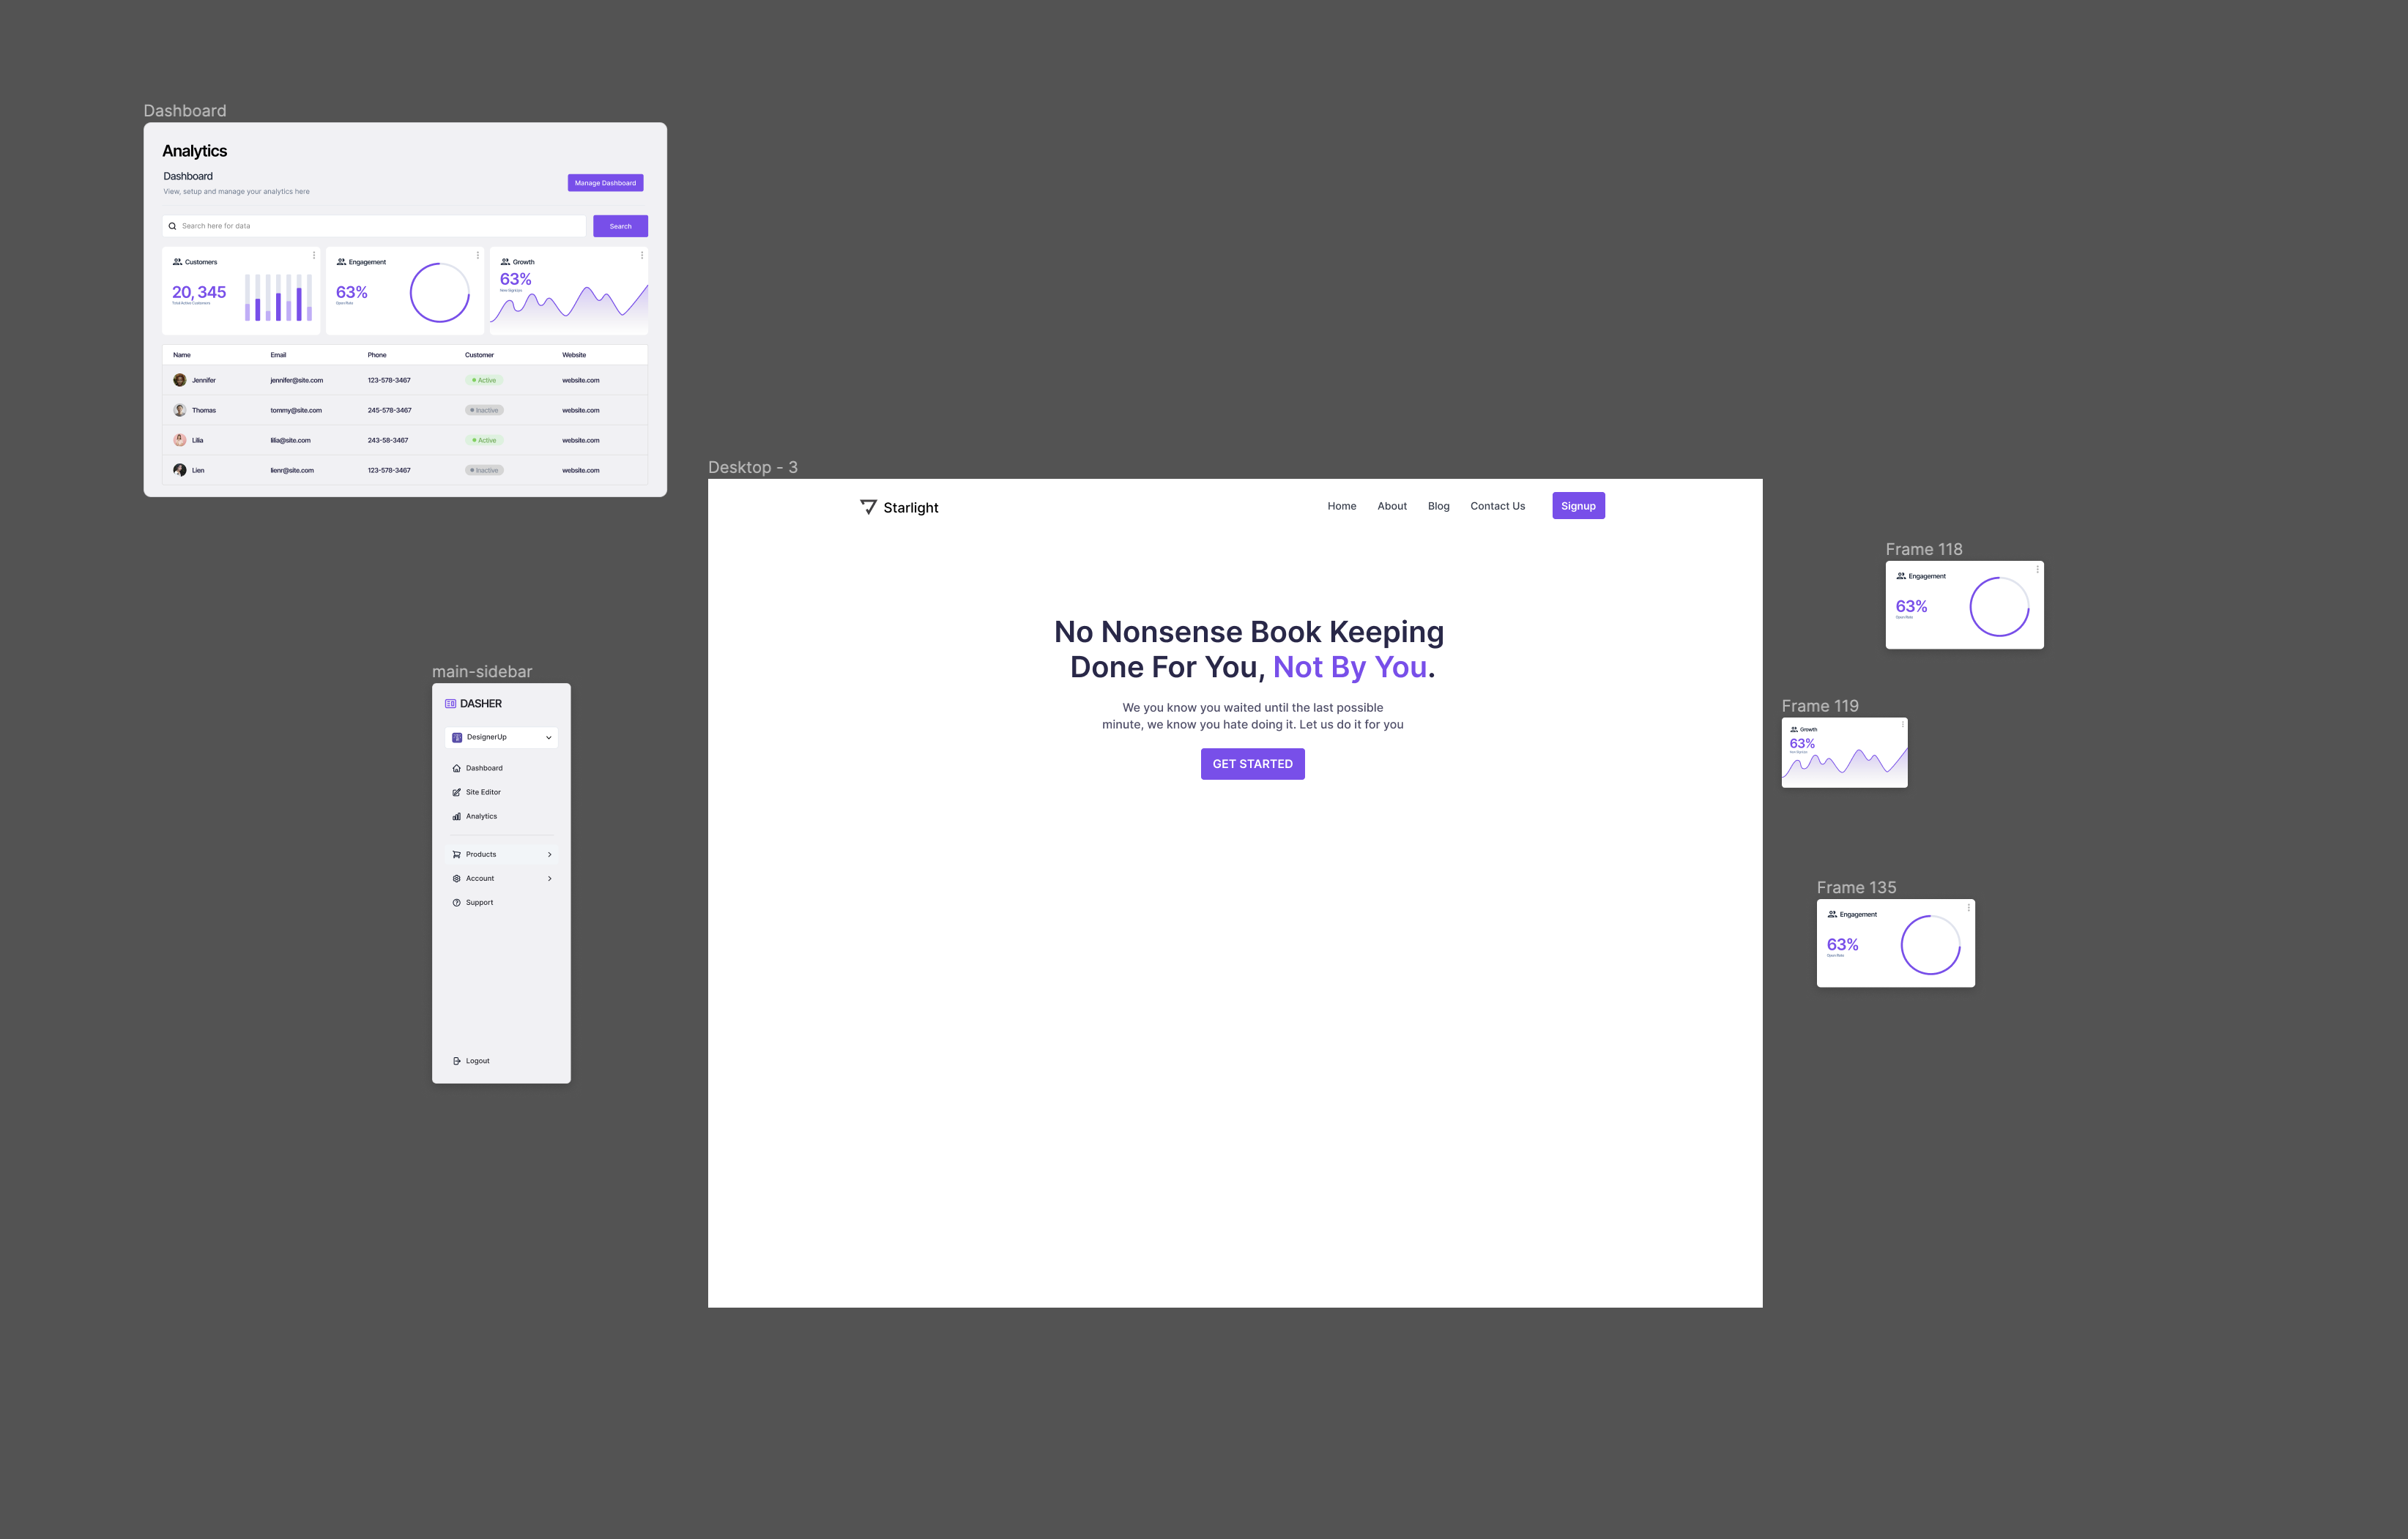 Based design white background with purple and gray dashboard components